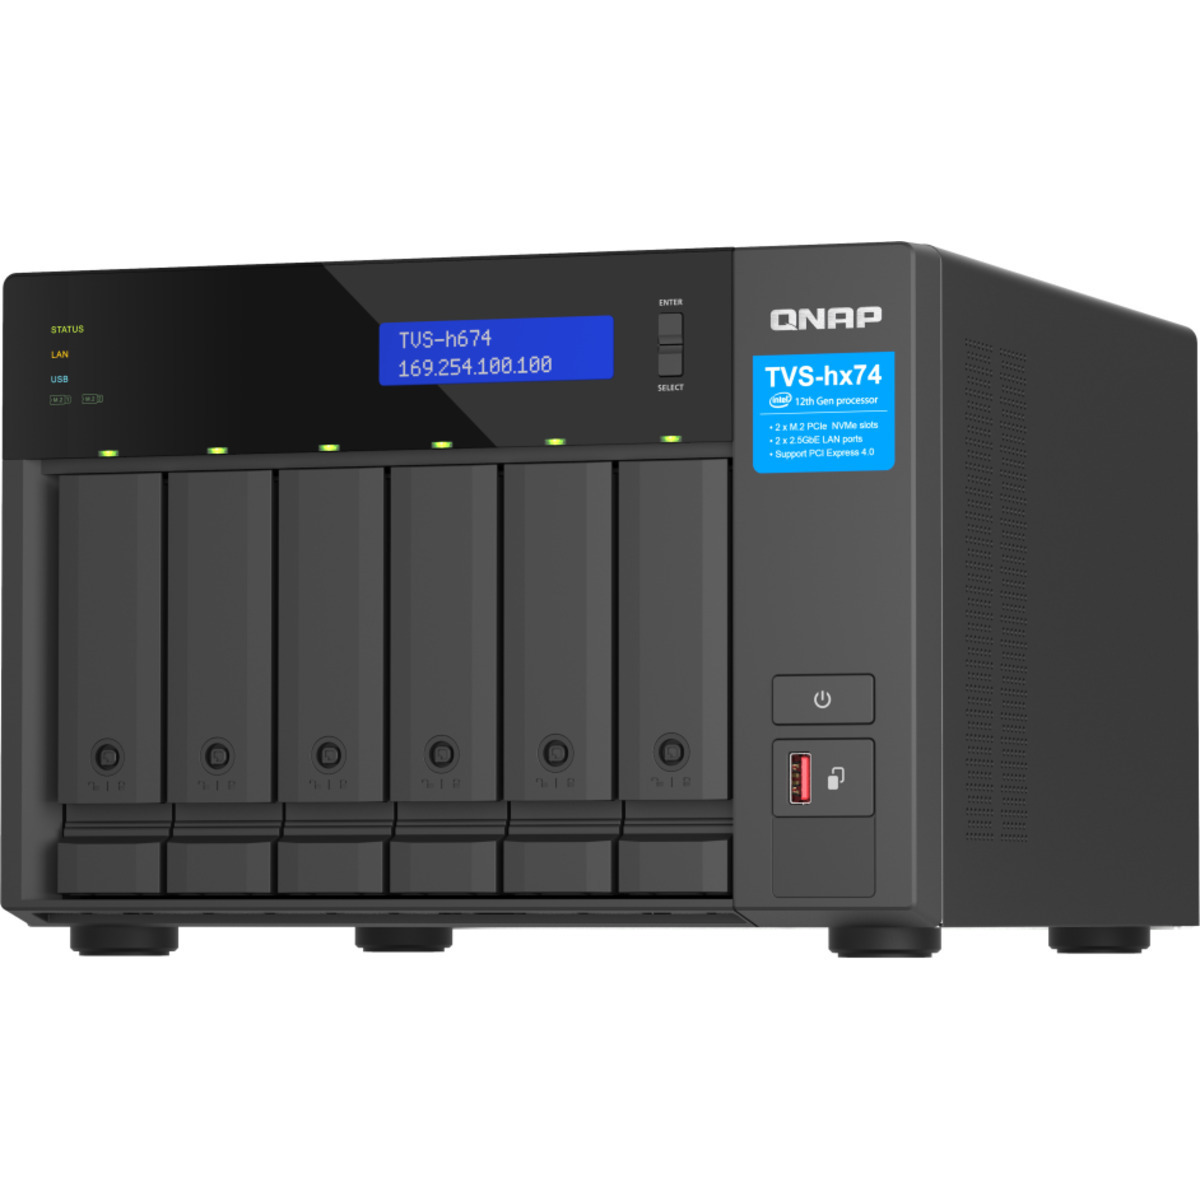 buy QNAP TVS-h674 Core i5 96tb Desktop NAS - Network Attached Storage Device 6x16000gb Western Digital Ultrastar DC HC550 WUH721816ALE6L4 3.5 7200rpm SATA 6Gb/s HDD ENTERPRISE Class Drives Installed - Burn-In Tested - nas headquarters buy network attached storage server device das new raid-5 free shipping simply usa TVS-h674 Core i5